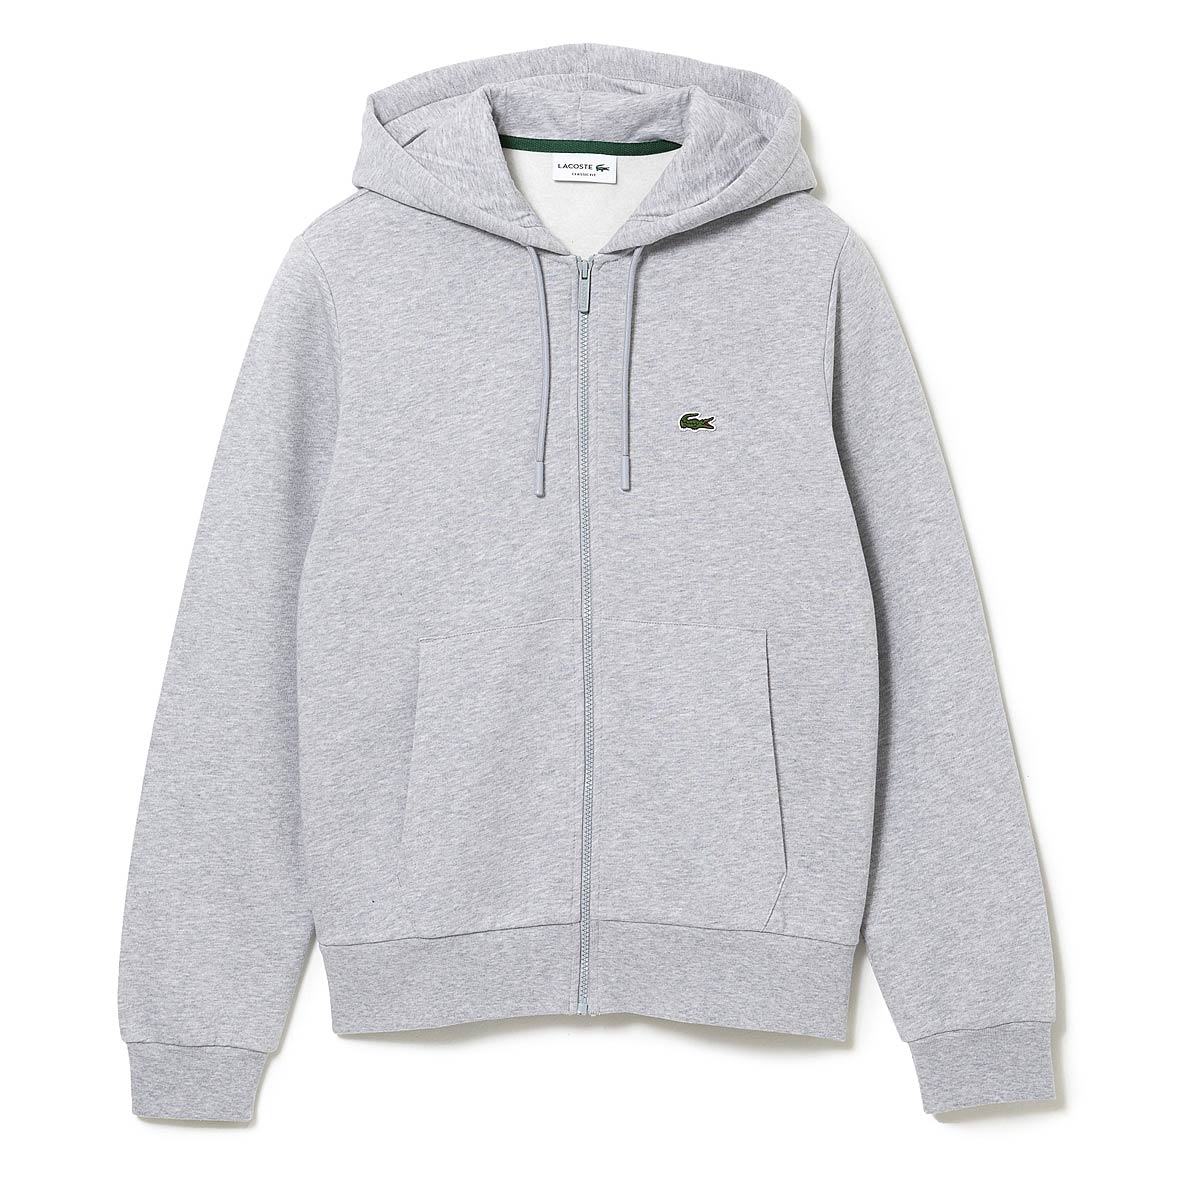 Lacoste Full-Zip Hoody, Silver Chine